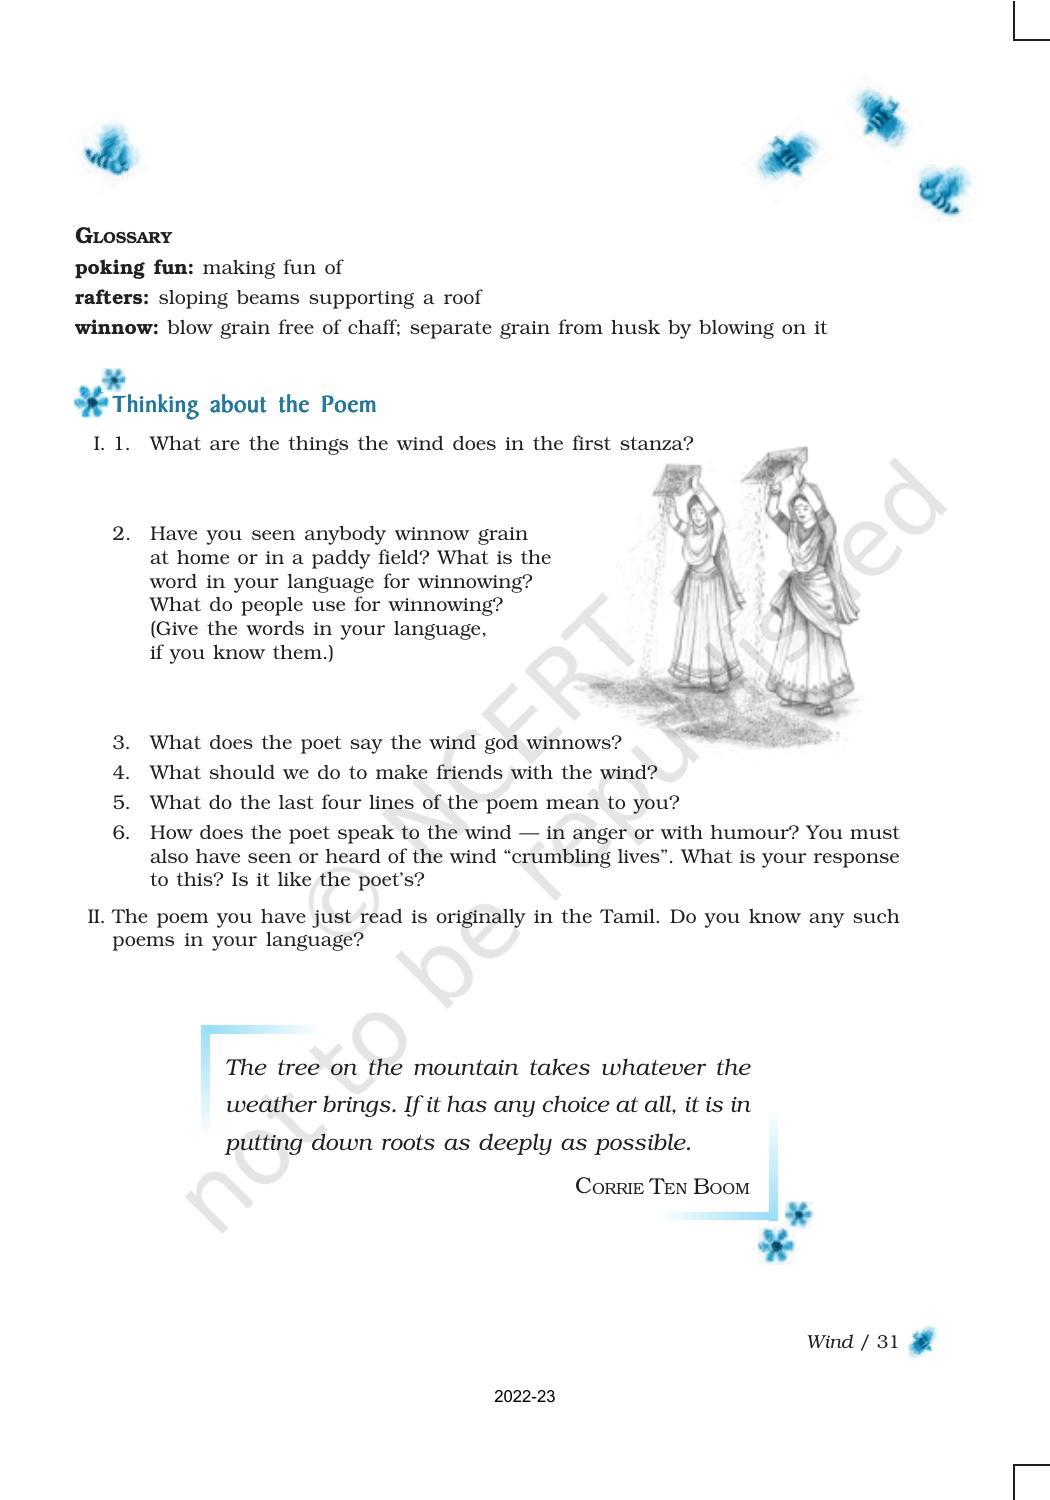 NCERT Book for Class 9 English Chapter 2 The Sound of Music - Page 15